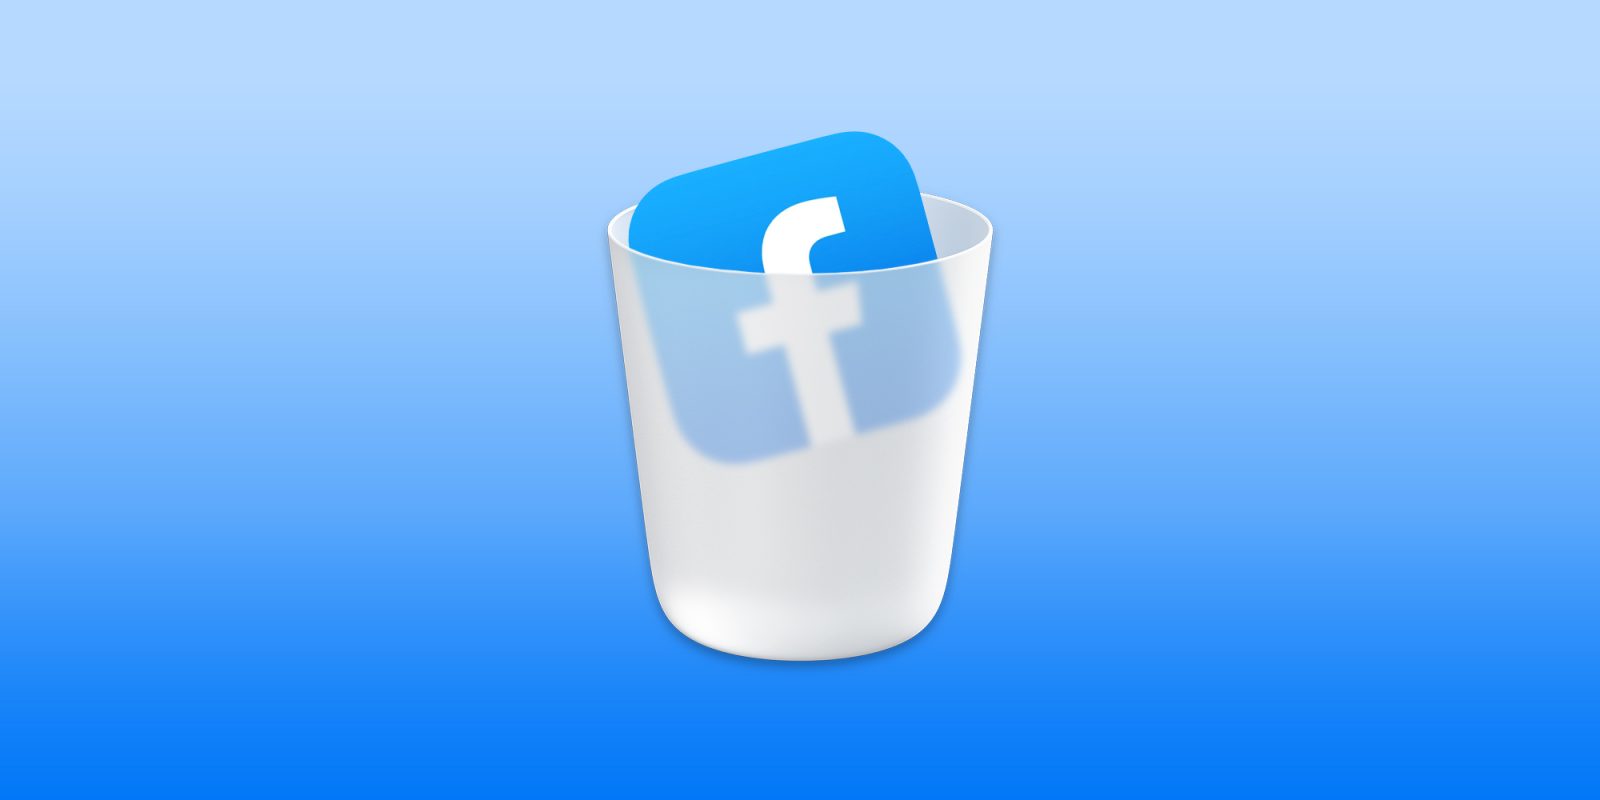 How To Delete Facebook From Iphone Or The Web - 9To5Mac